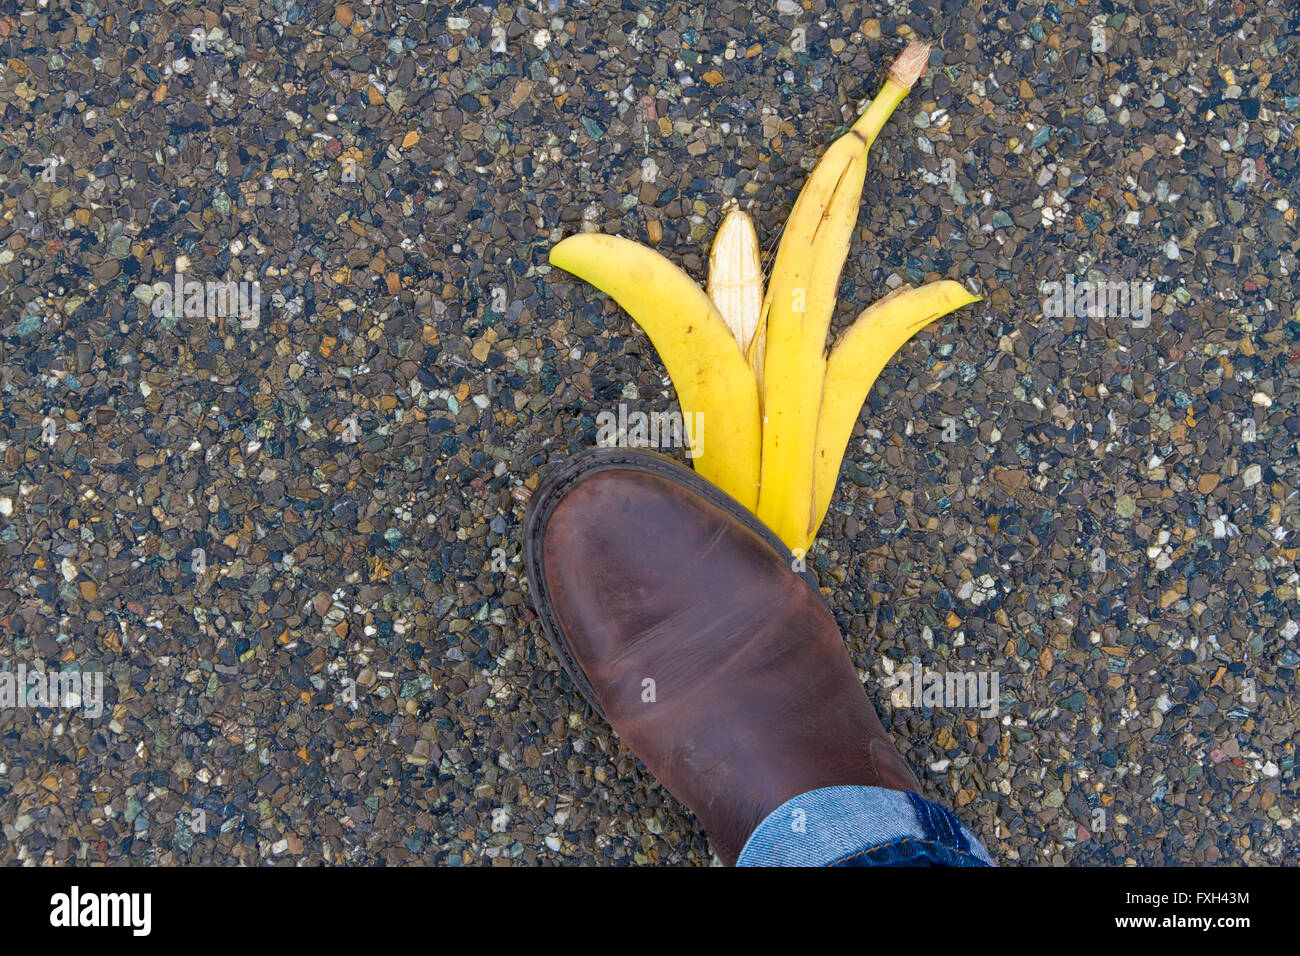 Man about to slip and fall on a banana skin Stock Photo